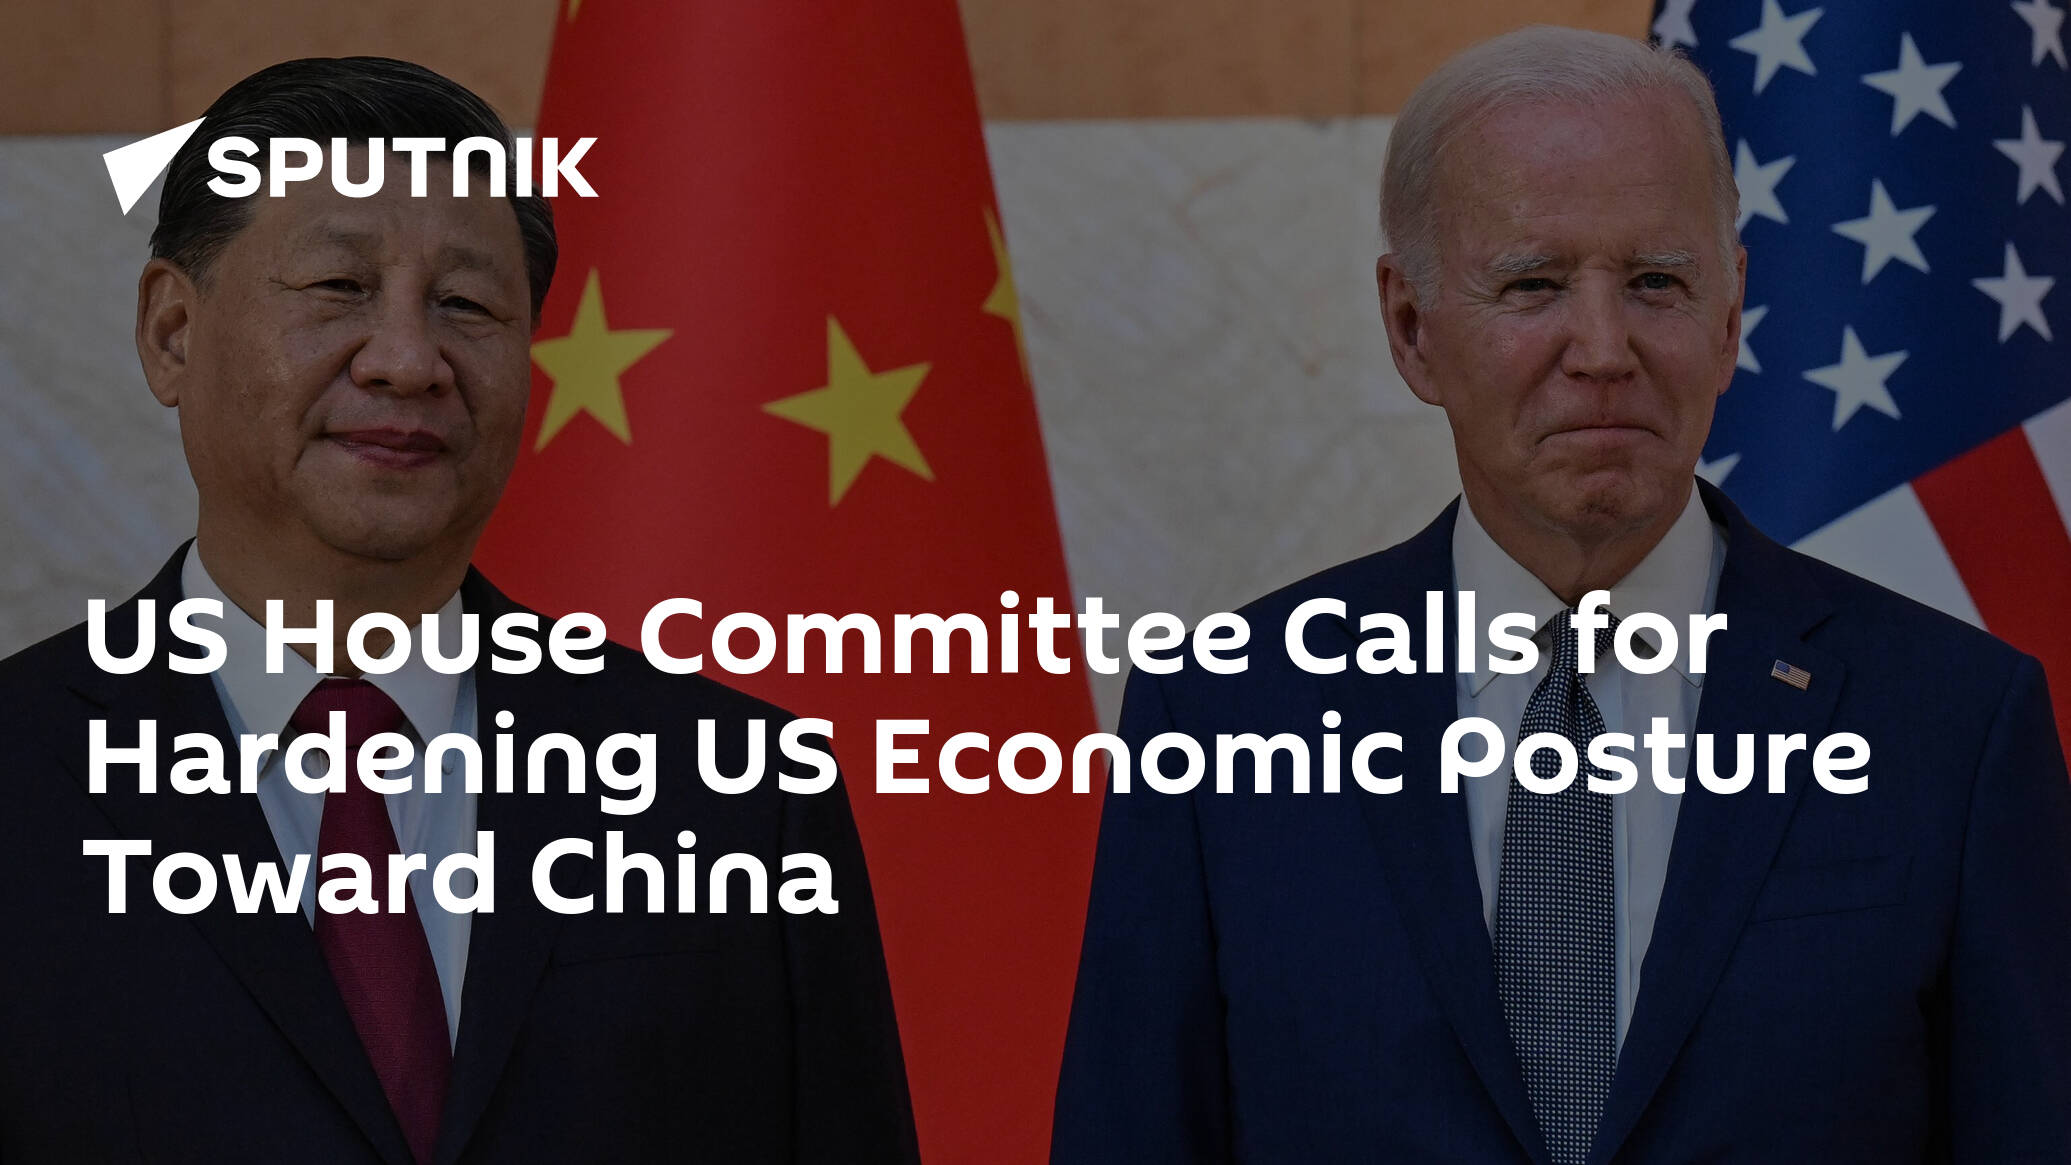 US House Committee Calls for Hardening US Economic Posture Toward China